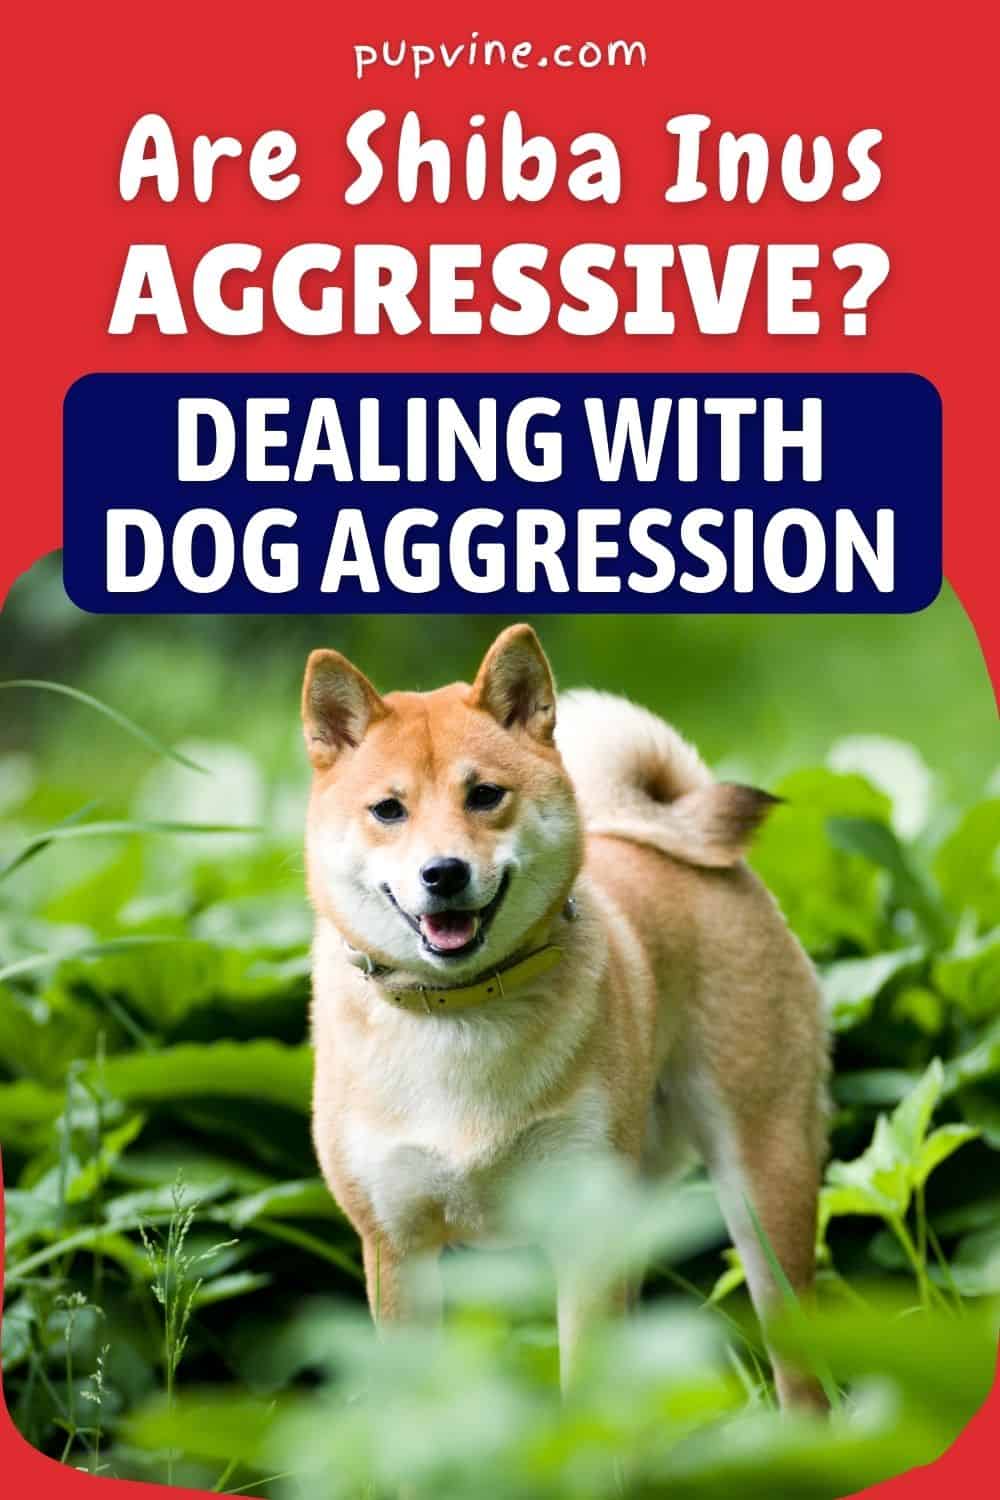 Are Shiba Inus Aggressive? Dealing With Dog Aggression